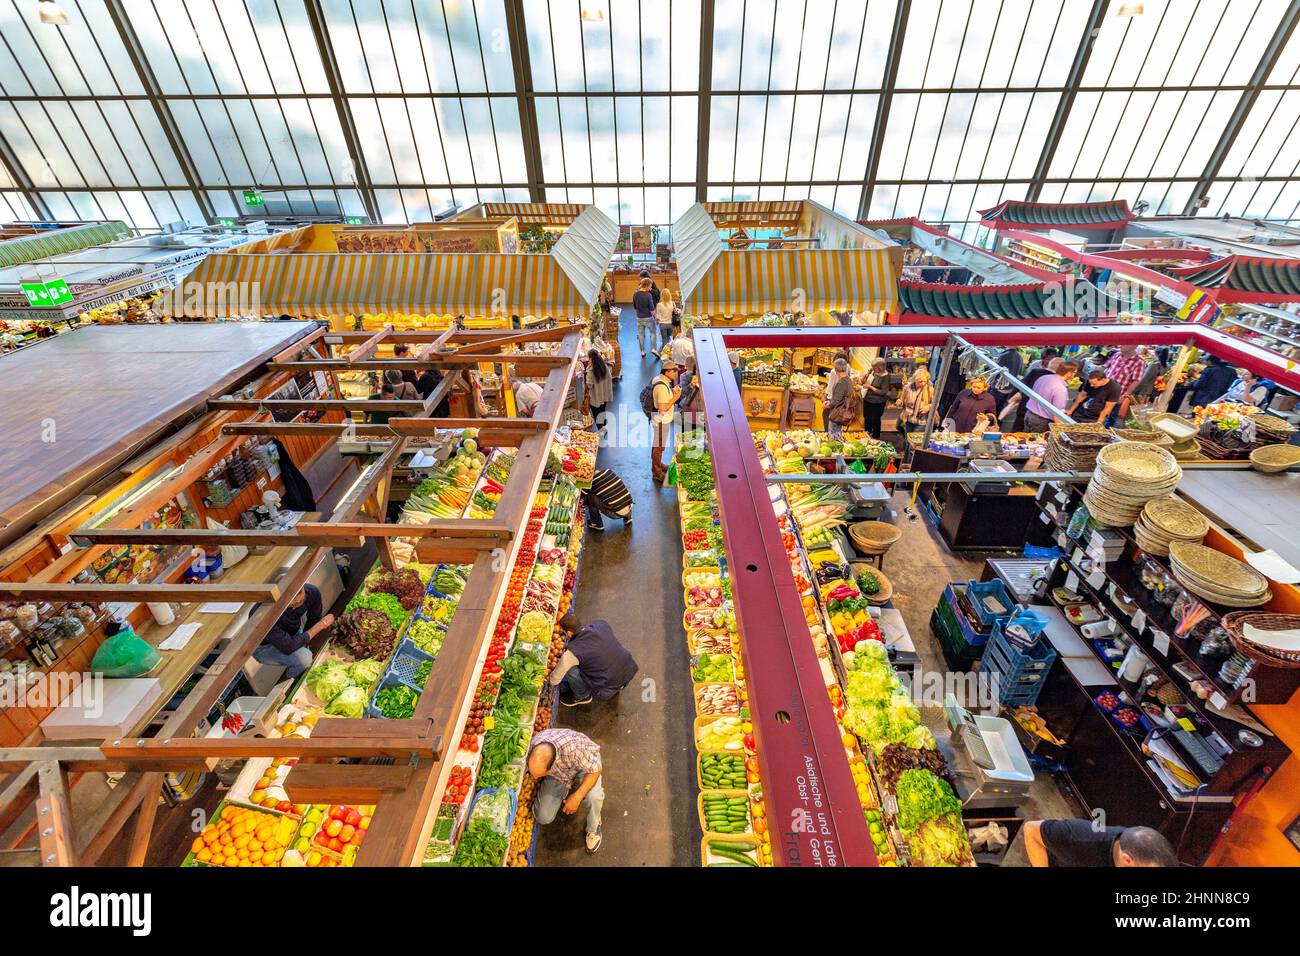 View of the Kleinmarkthalle, a traditional covered market that sells fruit, vegetable and seafood on Hasengasse in Frankfurt, Germany Stock Photo